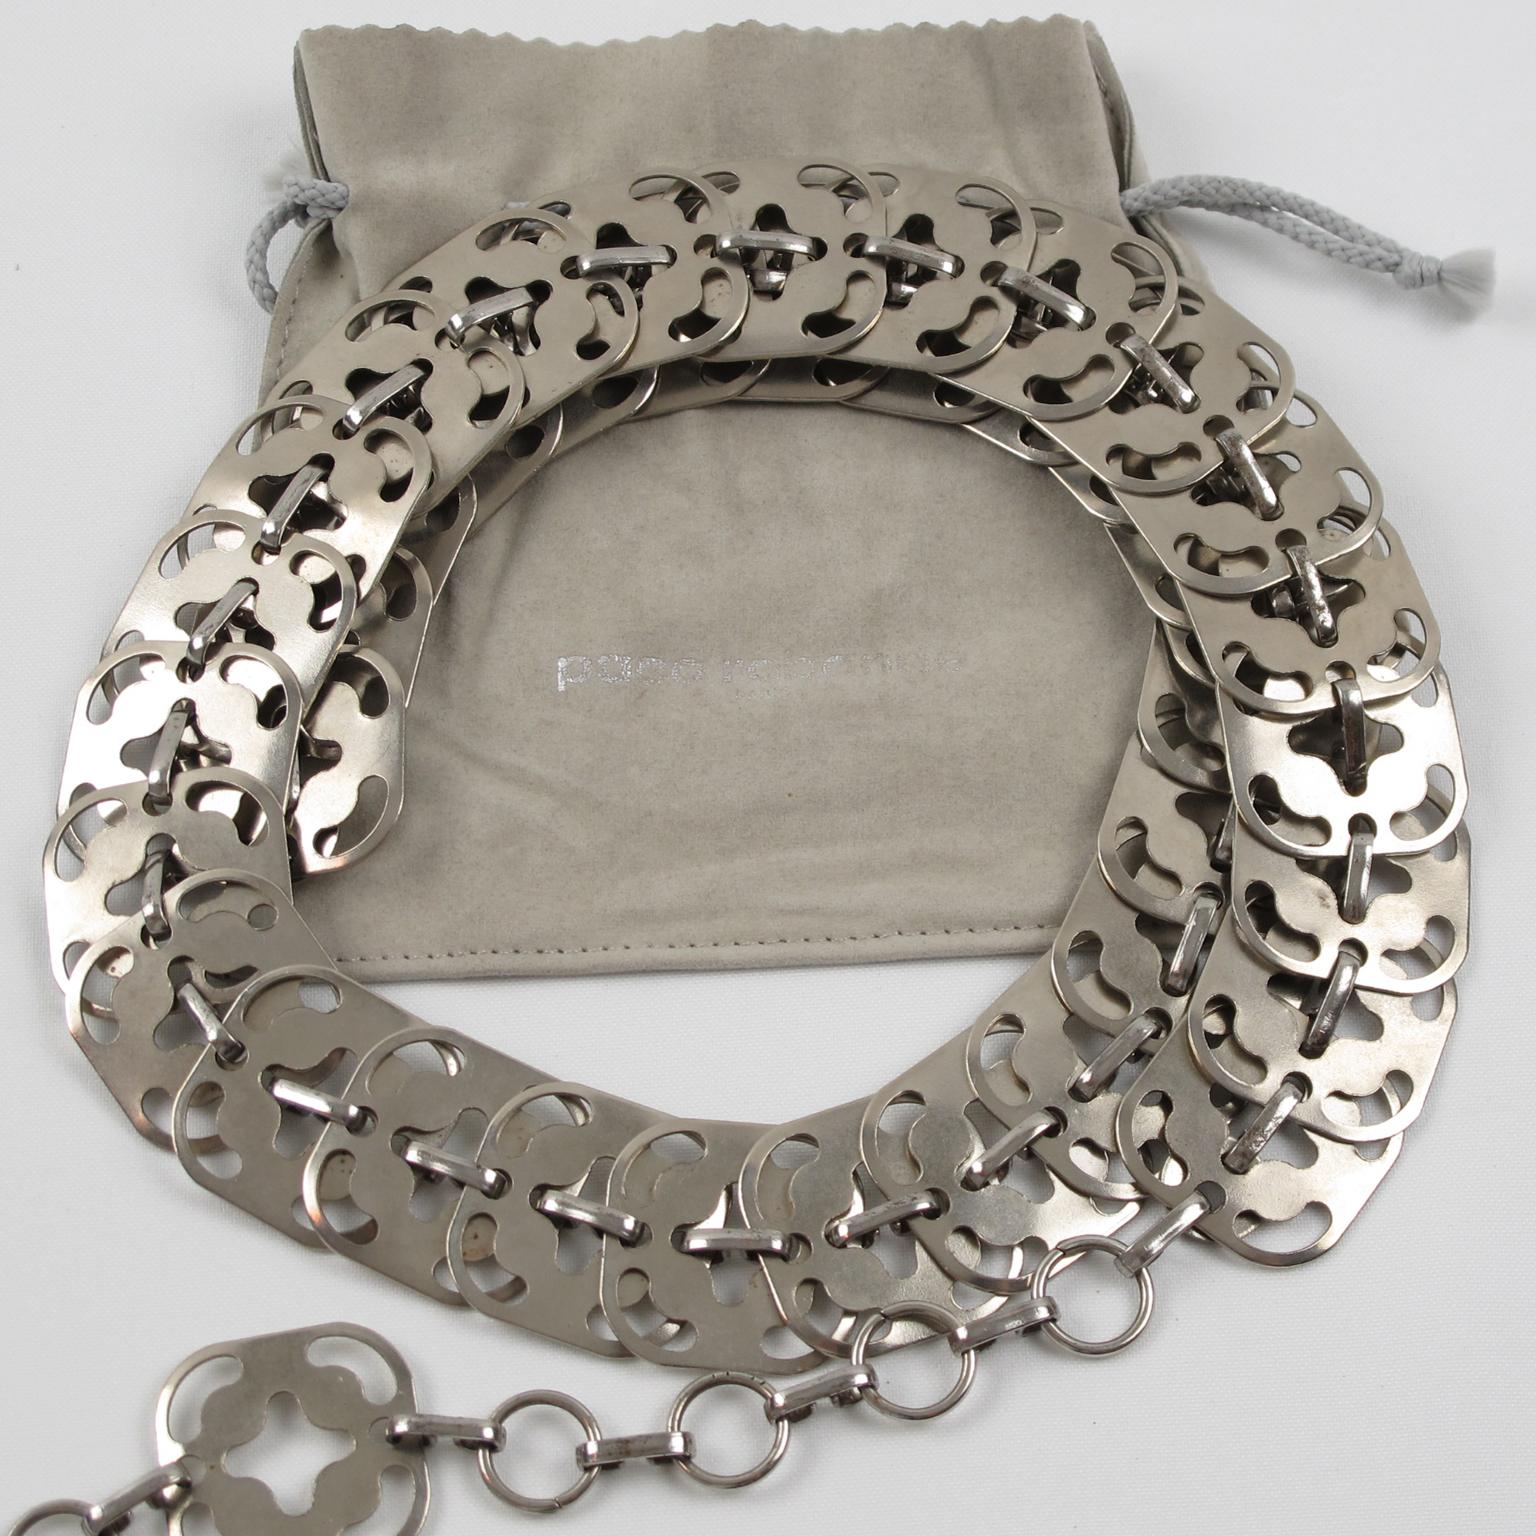 Stunning iconic metal chain mail square disk belt by French Designer Paco Rabanne, Paris. Original 1960s futuristic mixture of kinetic and metalwork, the belt features silver-tone sort of snake chain with a perforated design. One size fits all, with